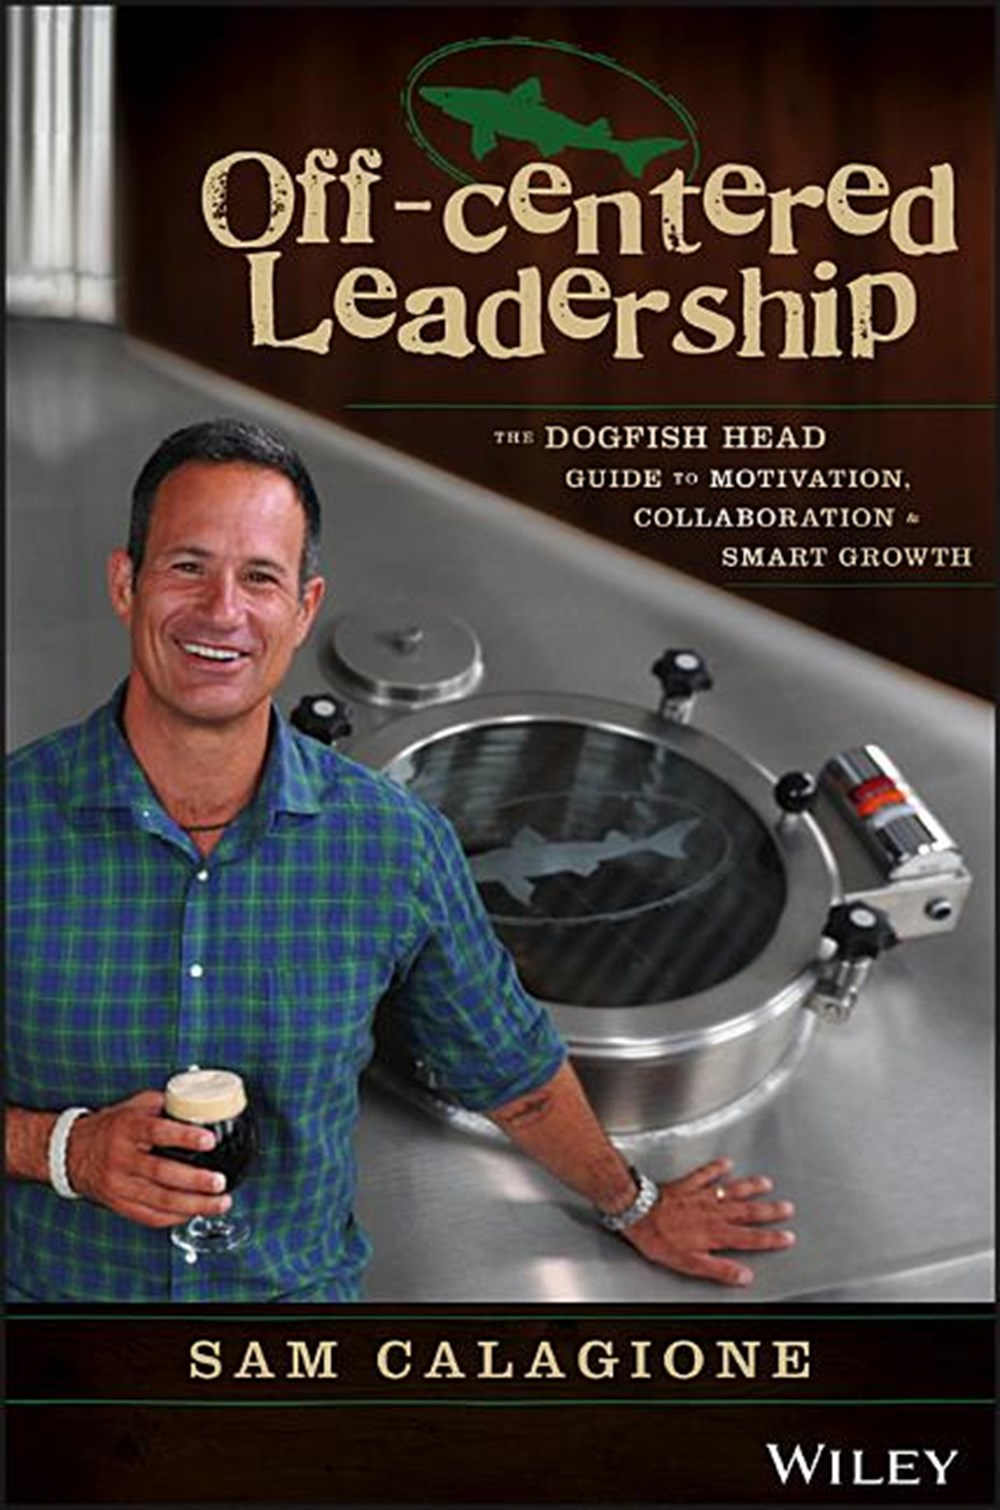 Off-Centered Leadership The Dogfish Head Guide to Motivation, Collaboration and Smart Growth